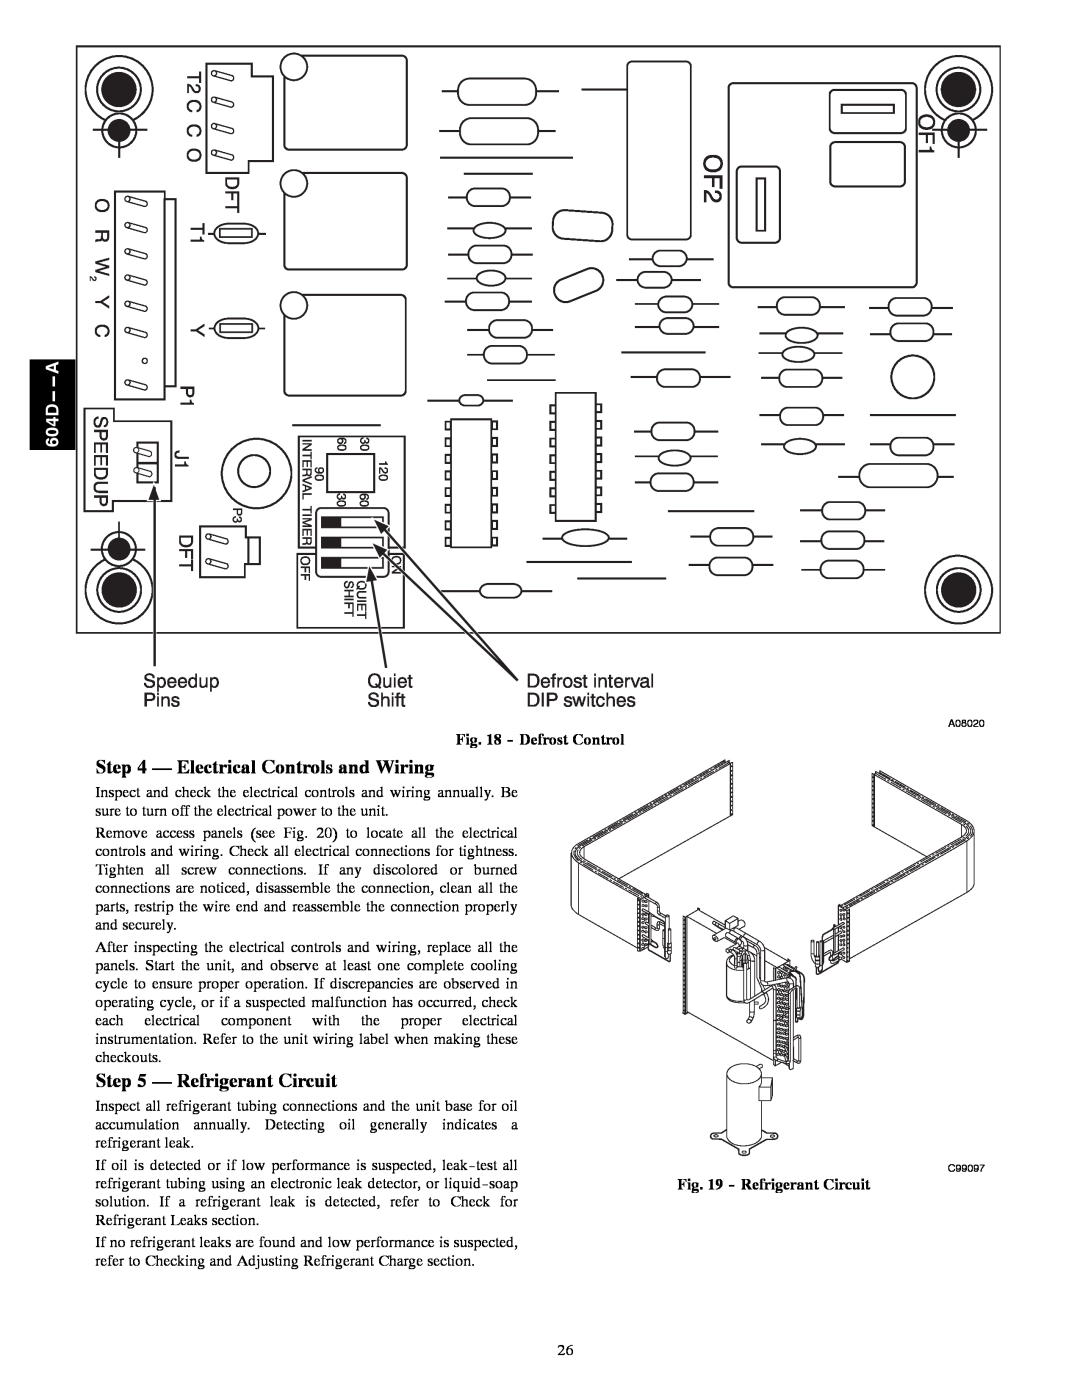 Bryant 604D--A installation instructions Electrical Controls and Wiring, Refrigerant Circuit 